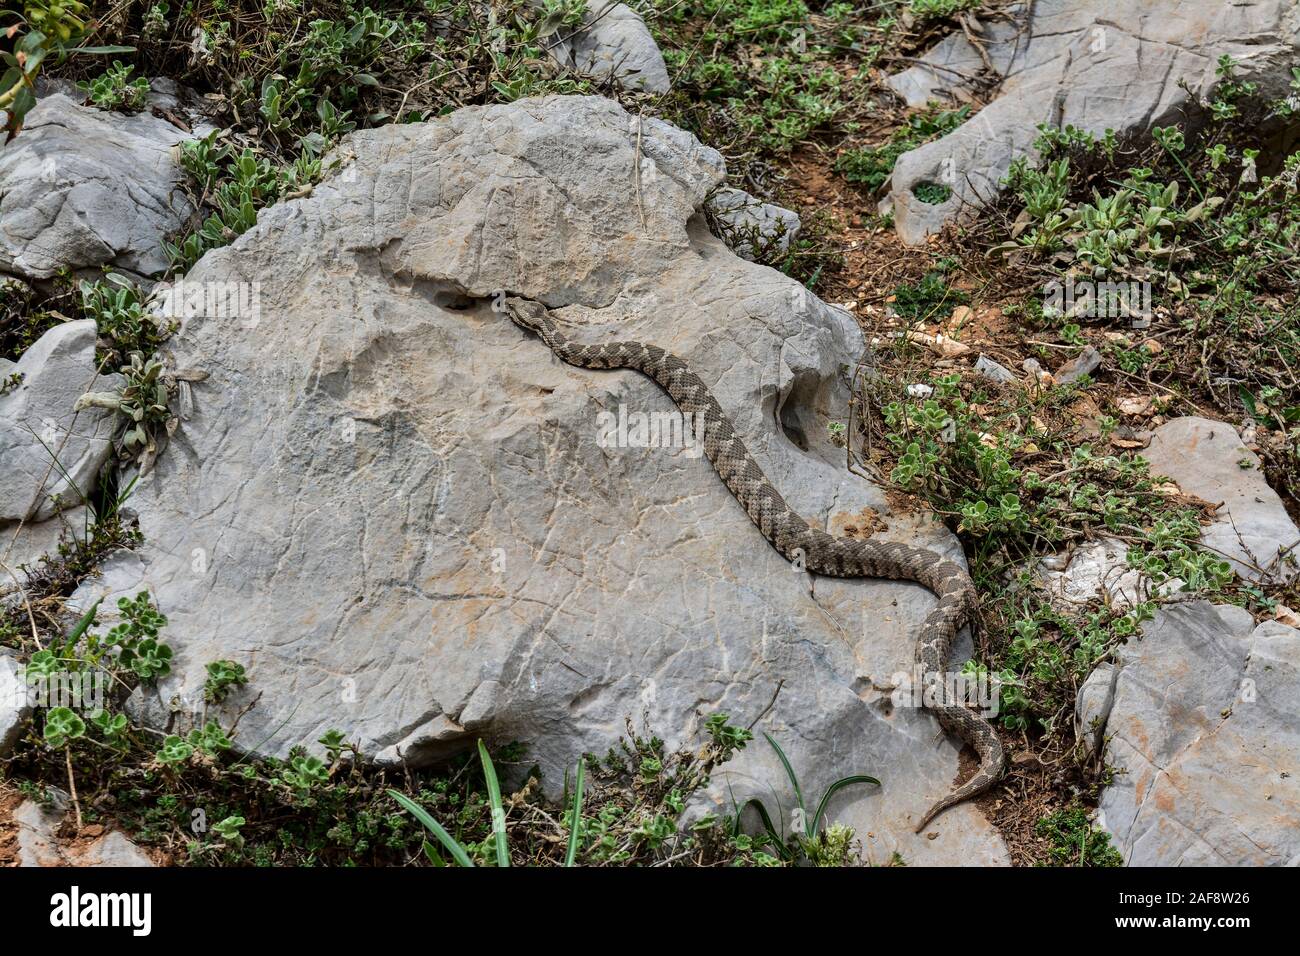 The Viper that roams on the stones Stock Photo